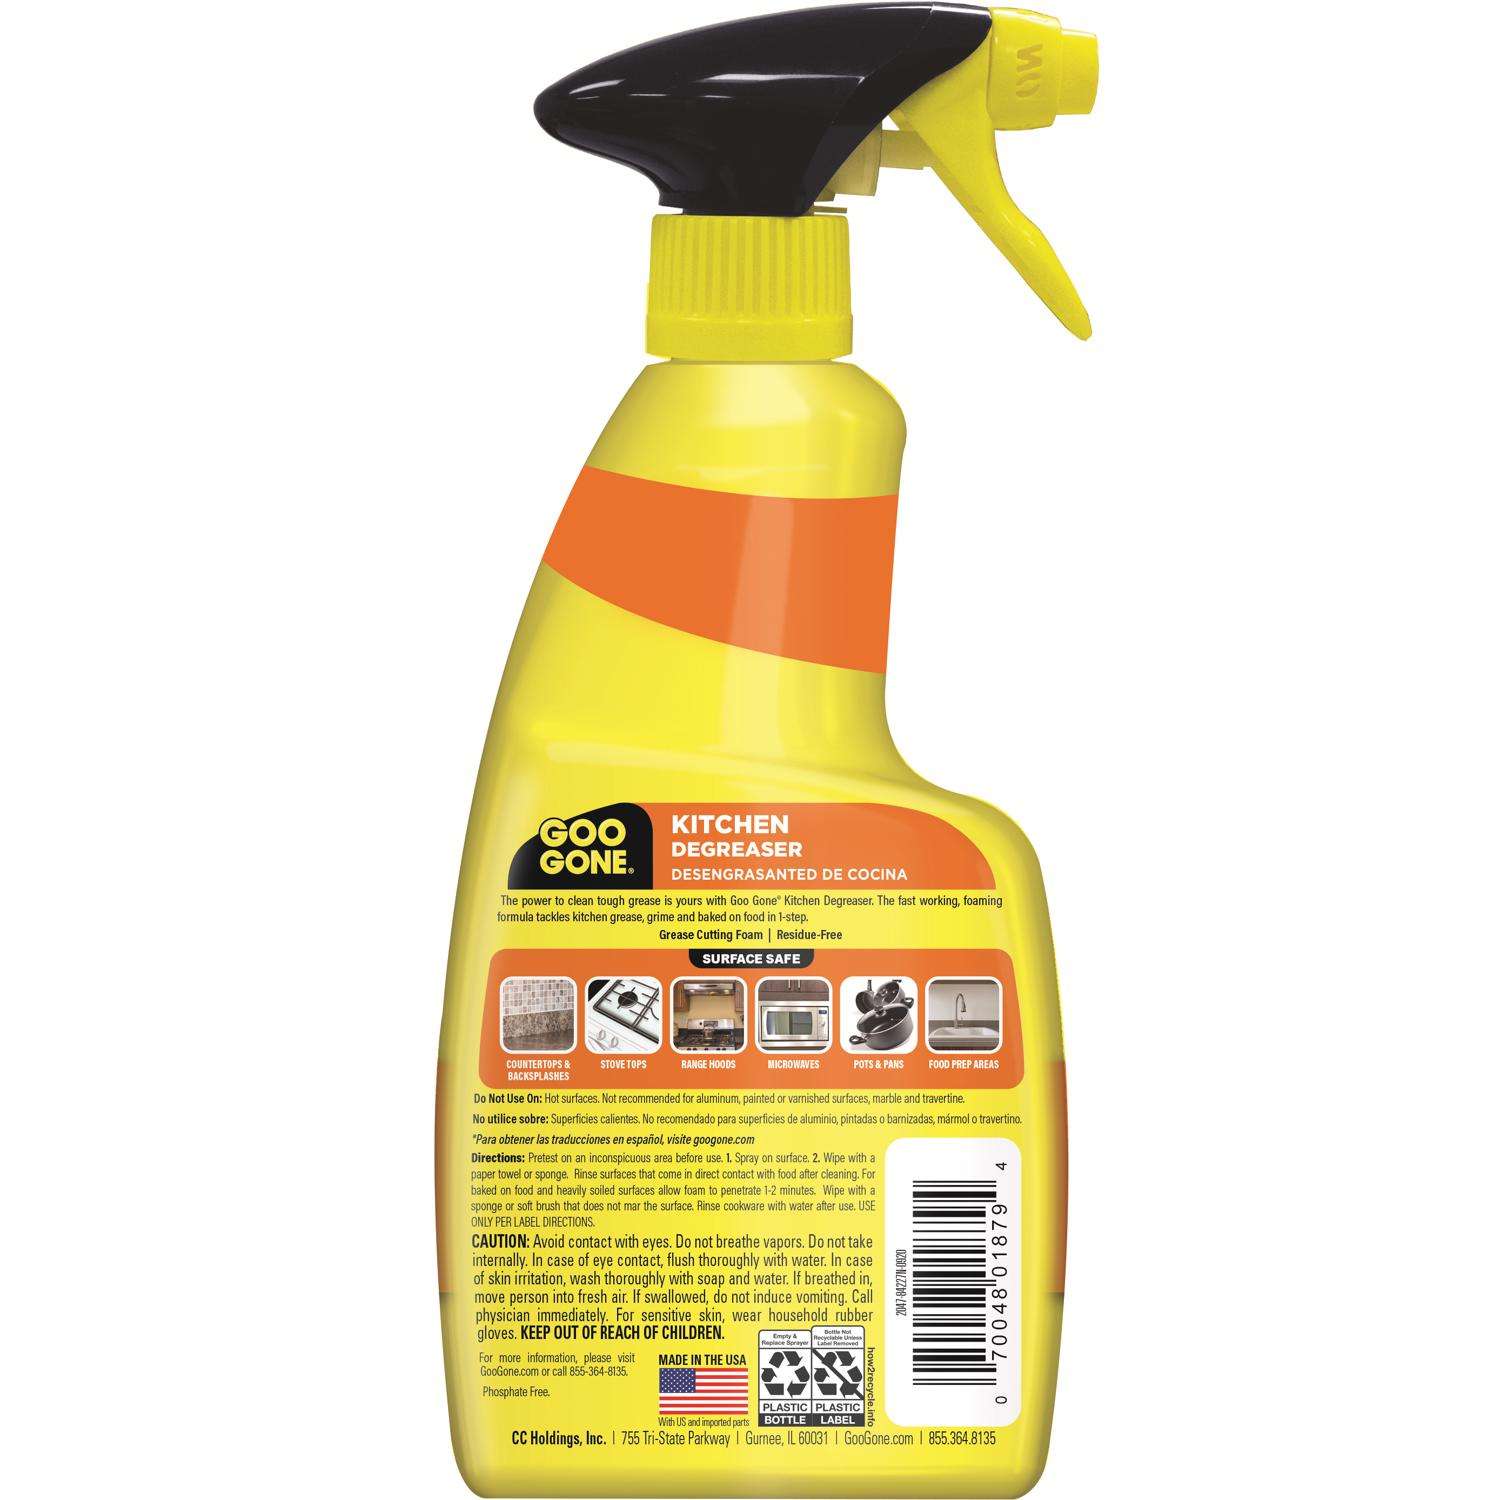 GUNK Instant Parts Cleaner and Degreaser High Pressure Trigger at